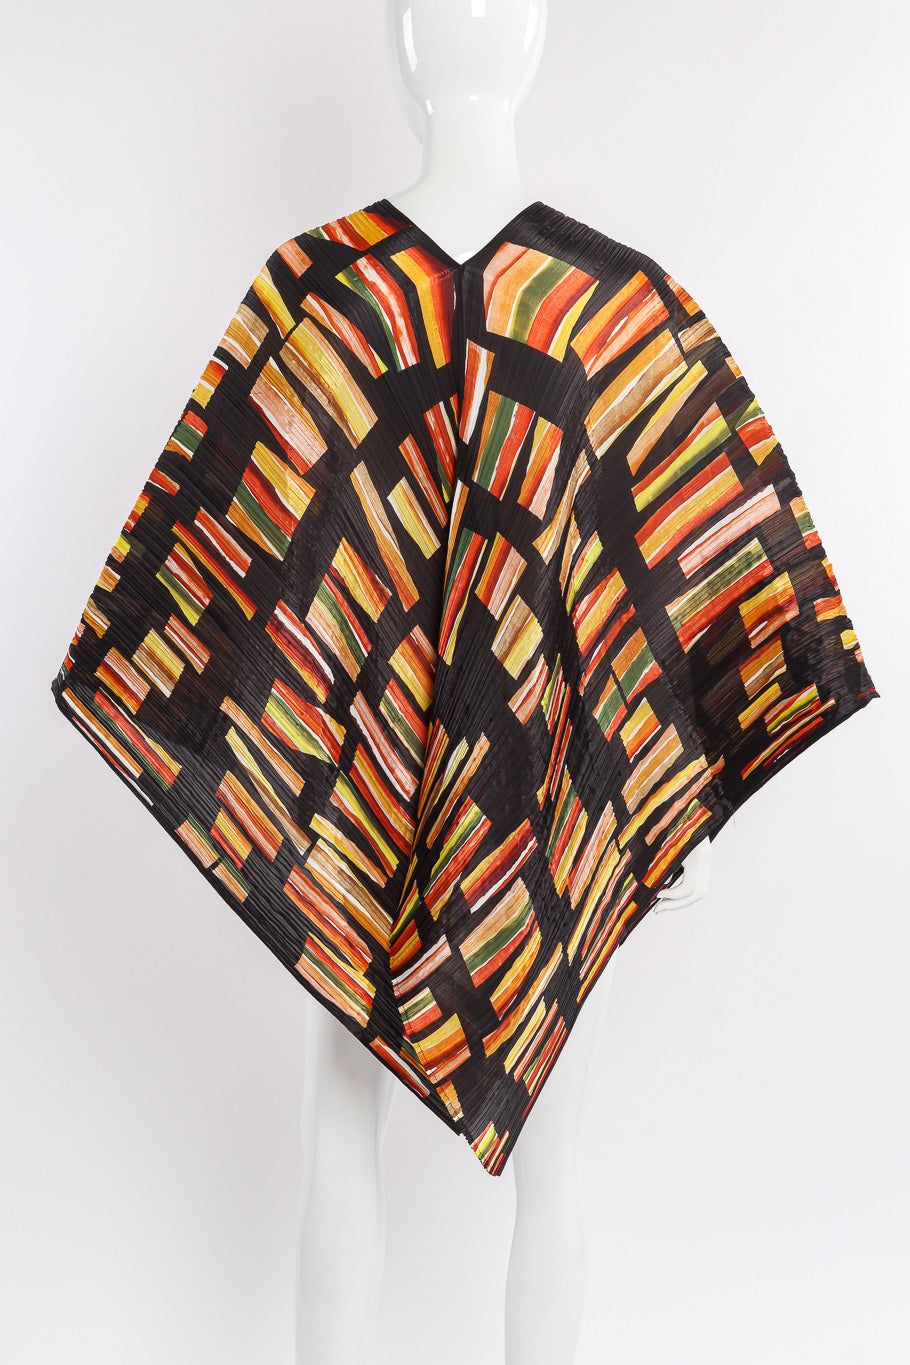 Poncho top by Issey Miyake for Pleats Please on mannequin back @recessla